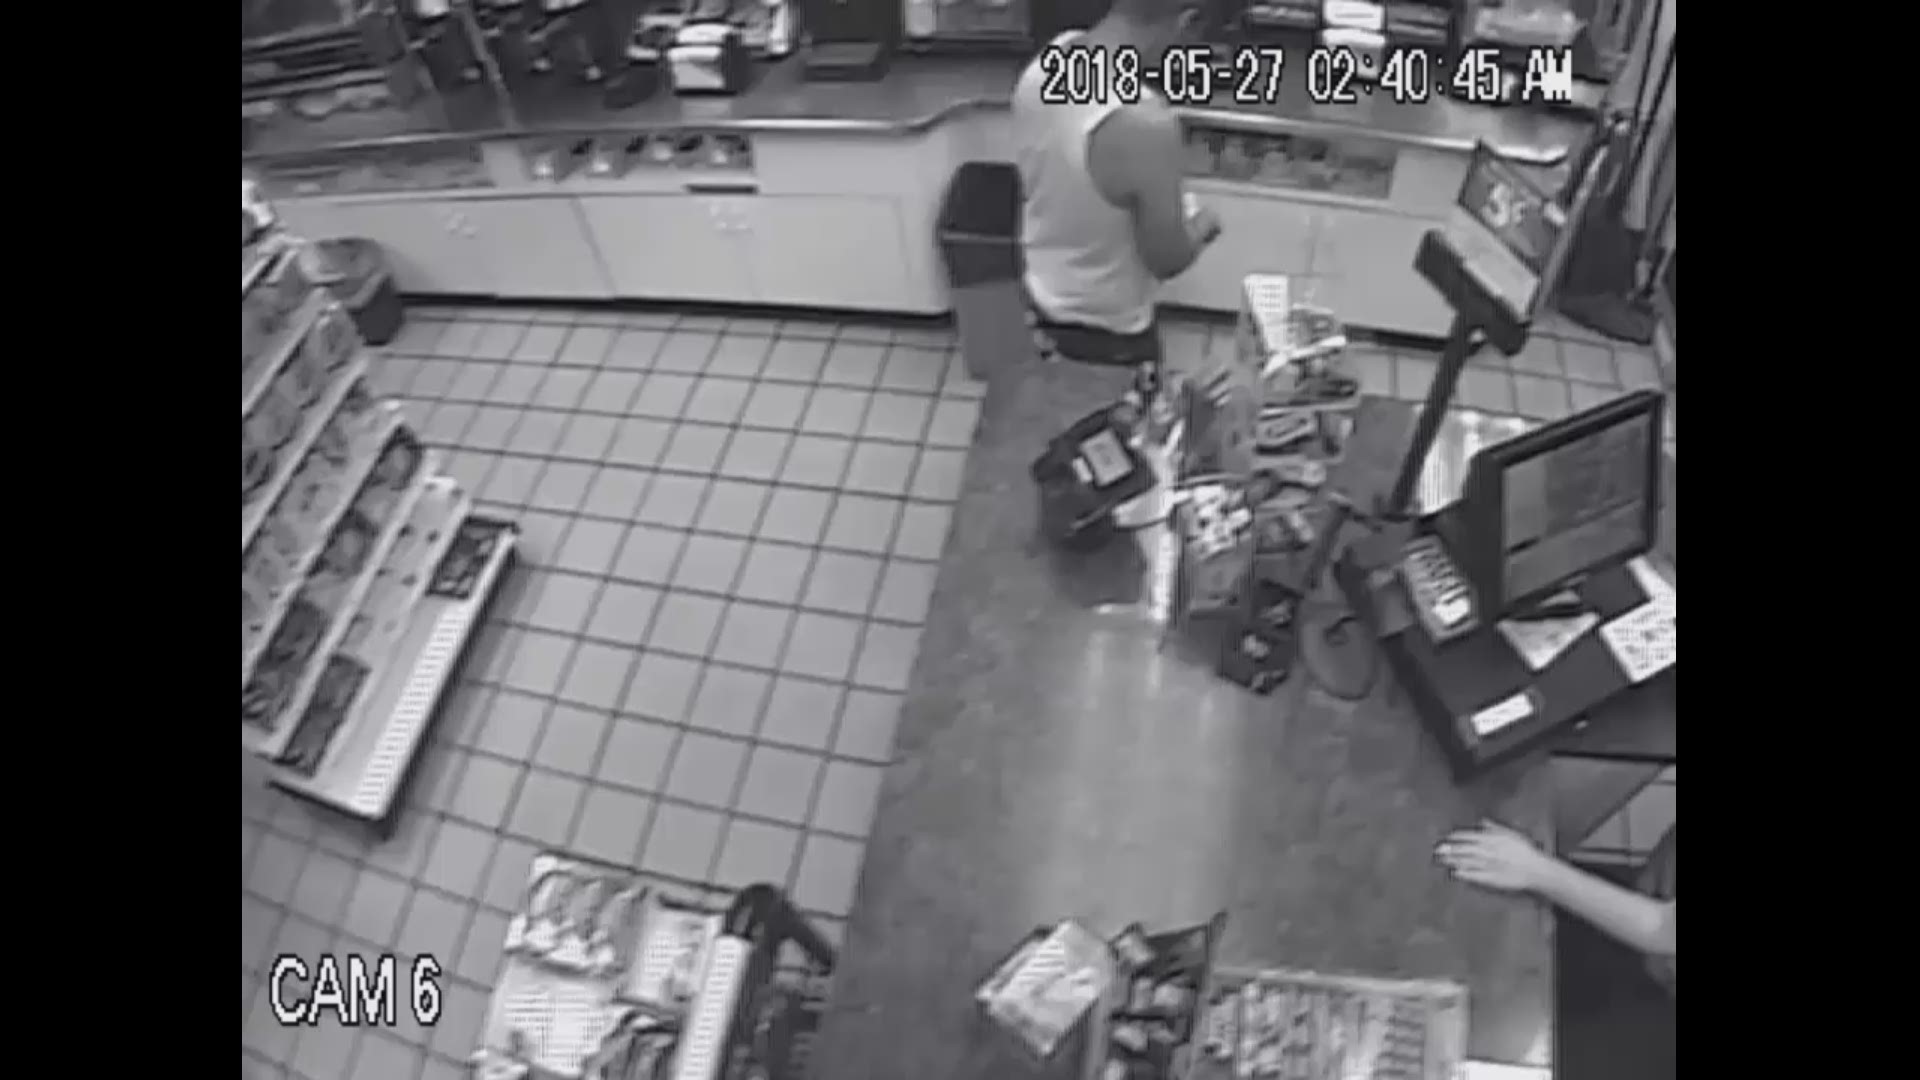 Suspect of robbery changes his shirt to go into the store for a second time and rob.